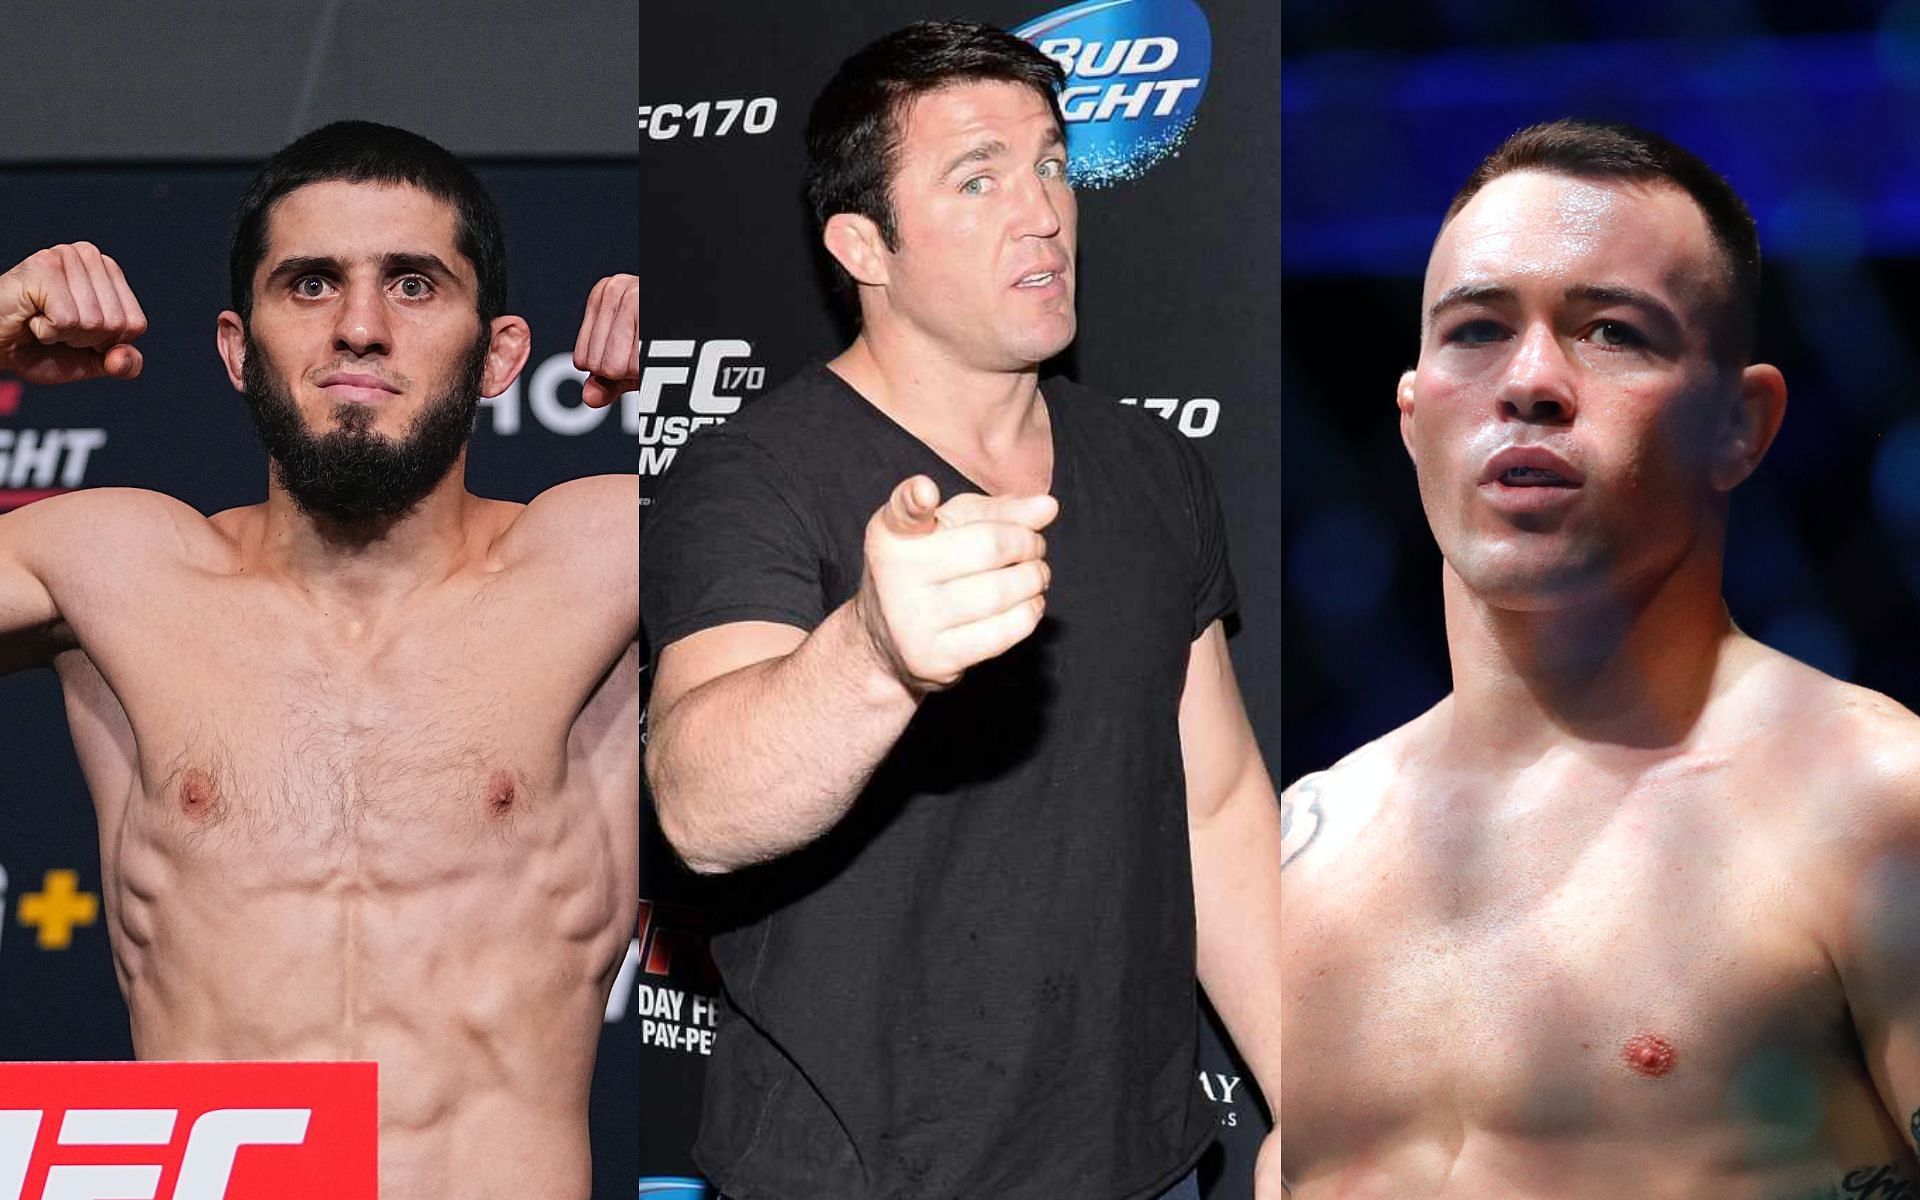 Islam Makhachev, Chael Sonnen and Colby Covington [Image credits: Getty Images]